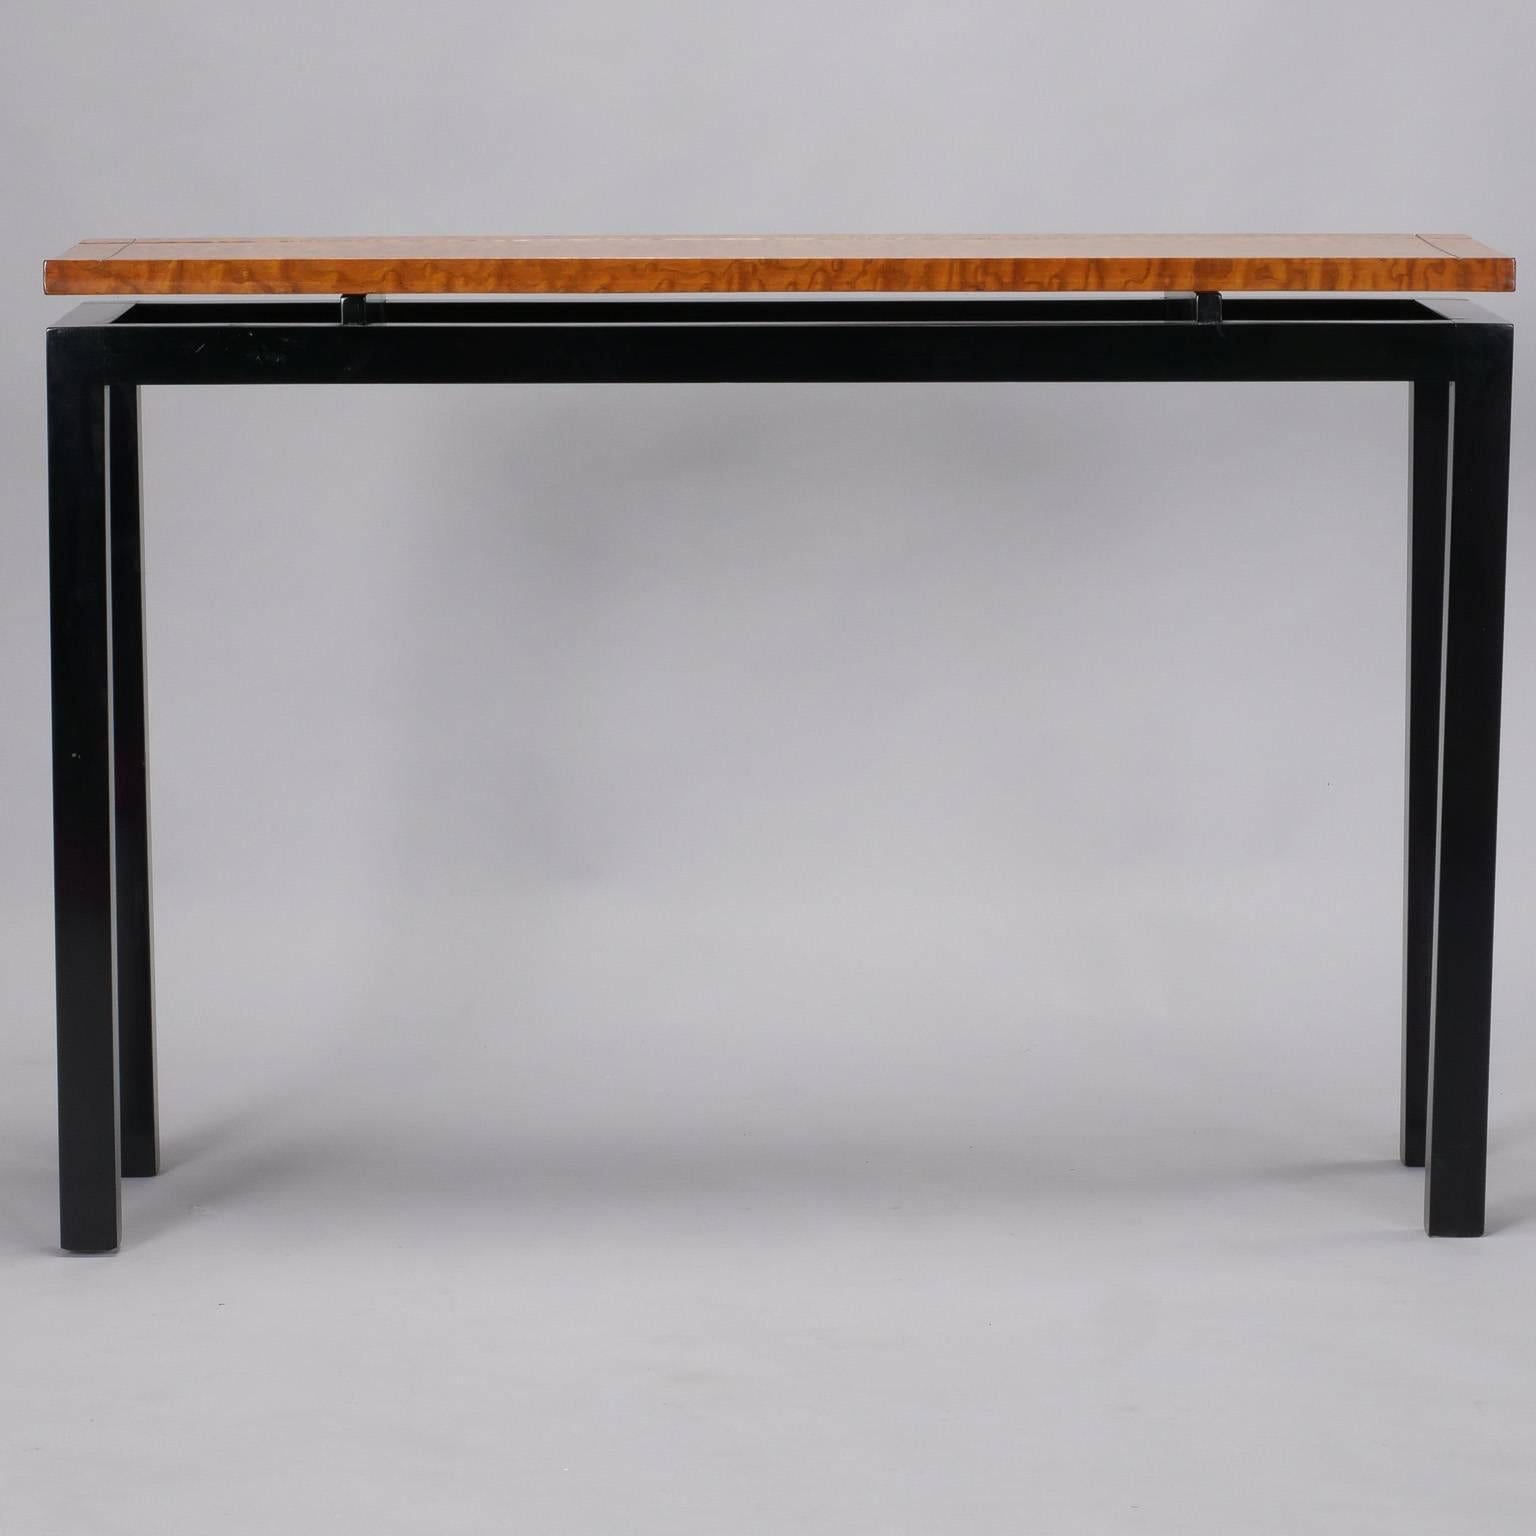 French console table has floating style burr walnut tabletop with Parsons style ebonized base, circa 1970s. Unknown maker. Excellent vintage condition.

        